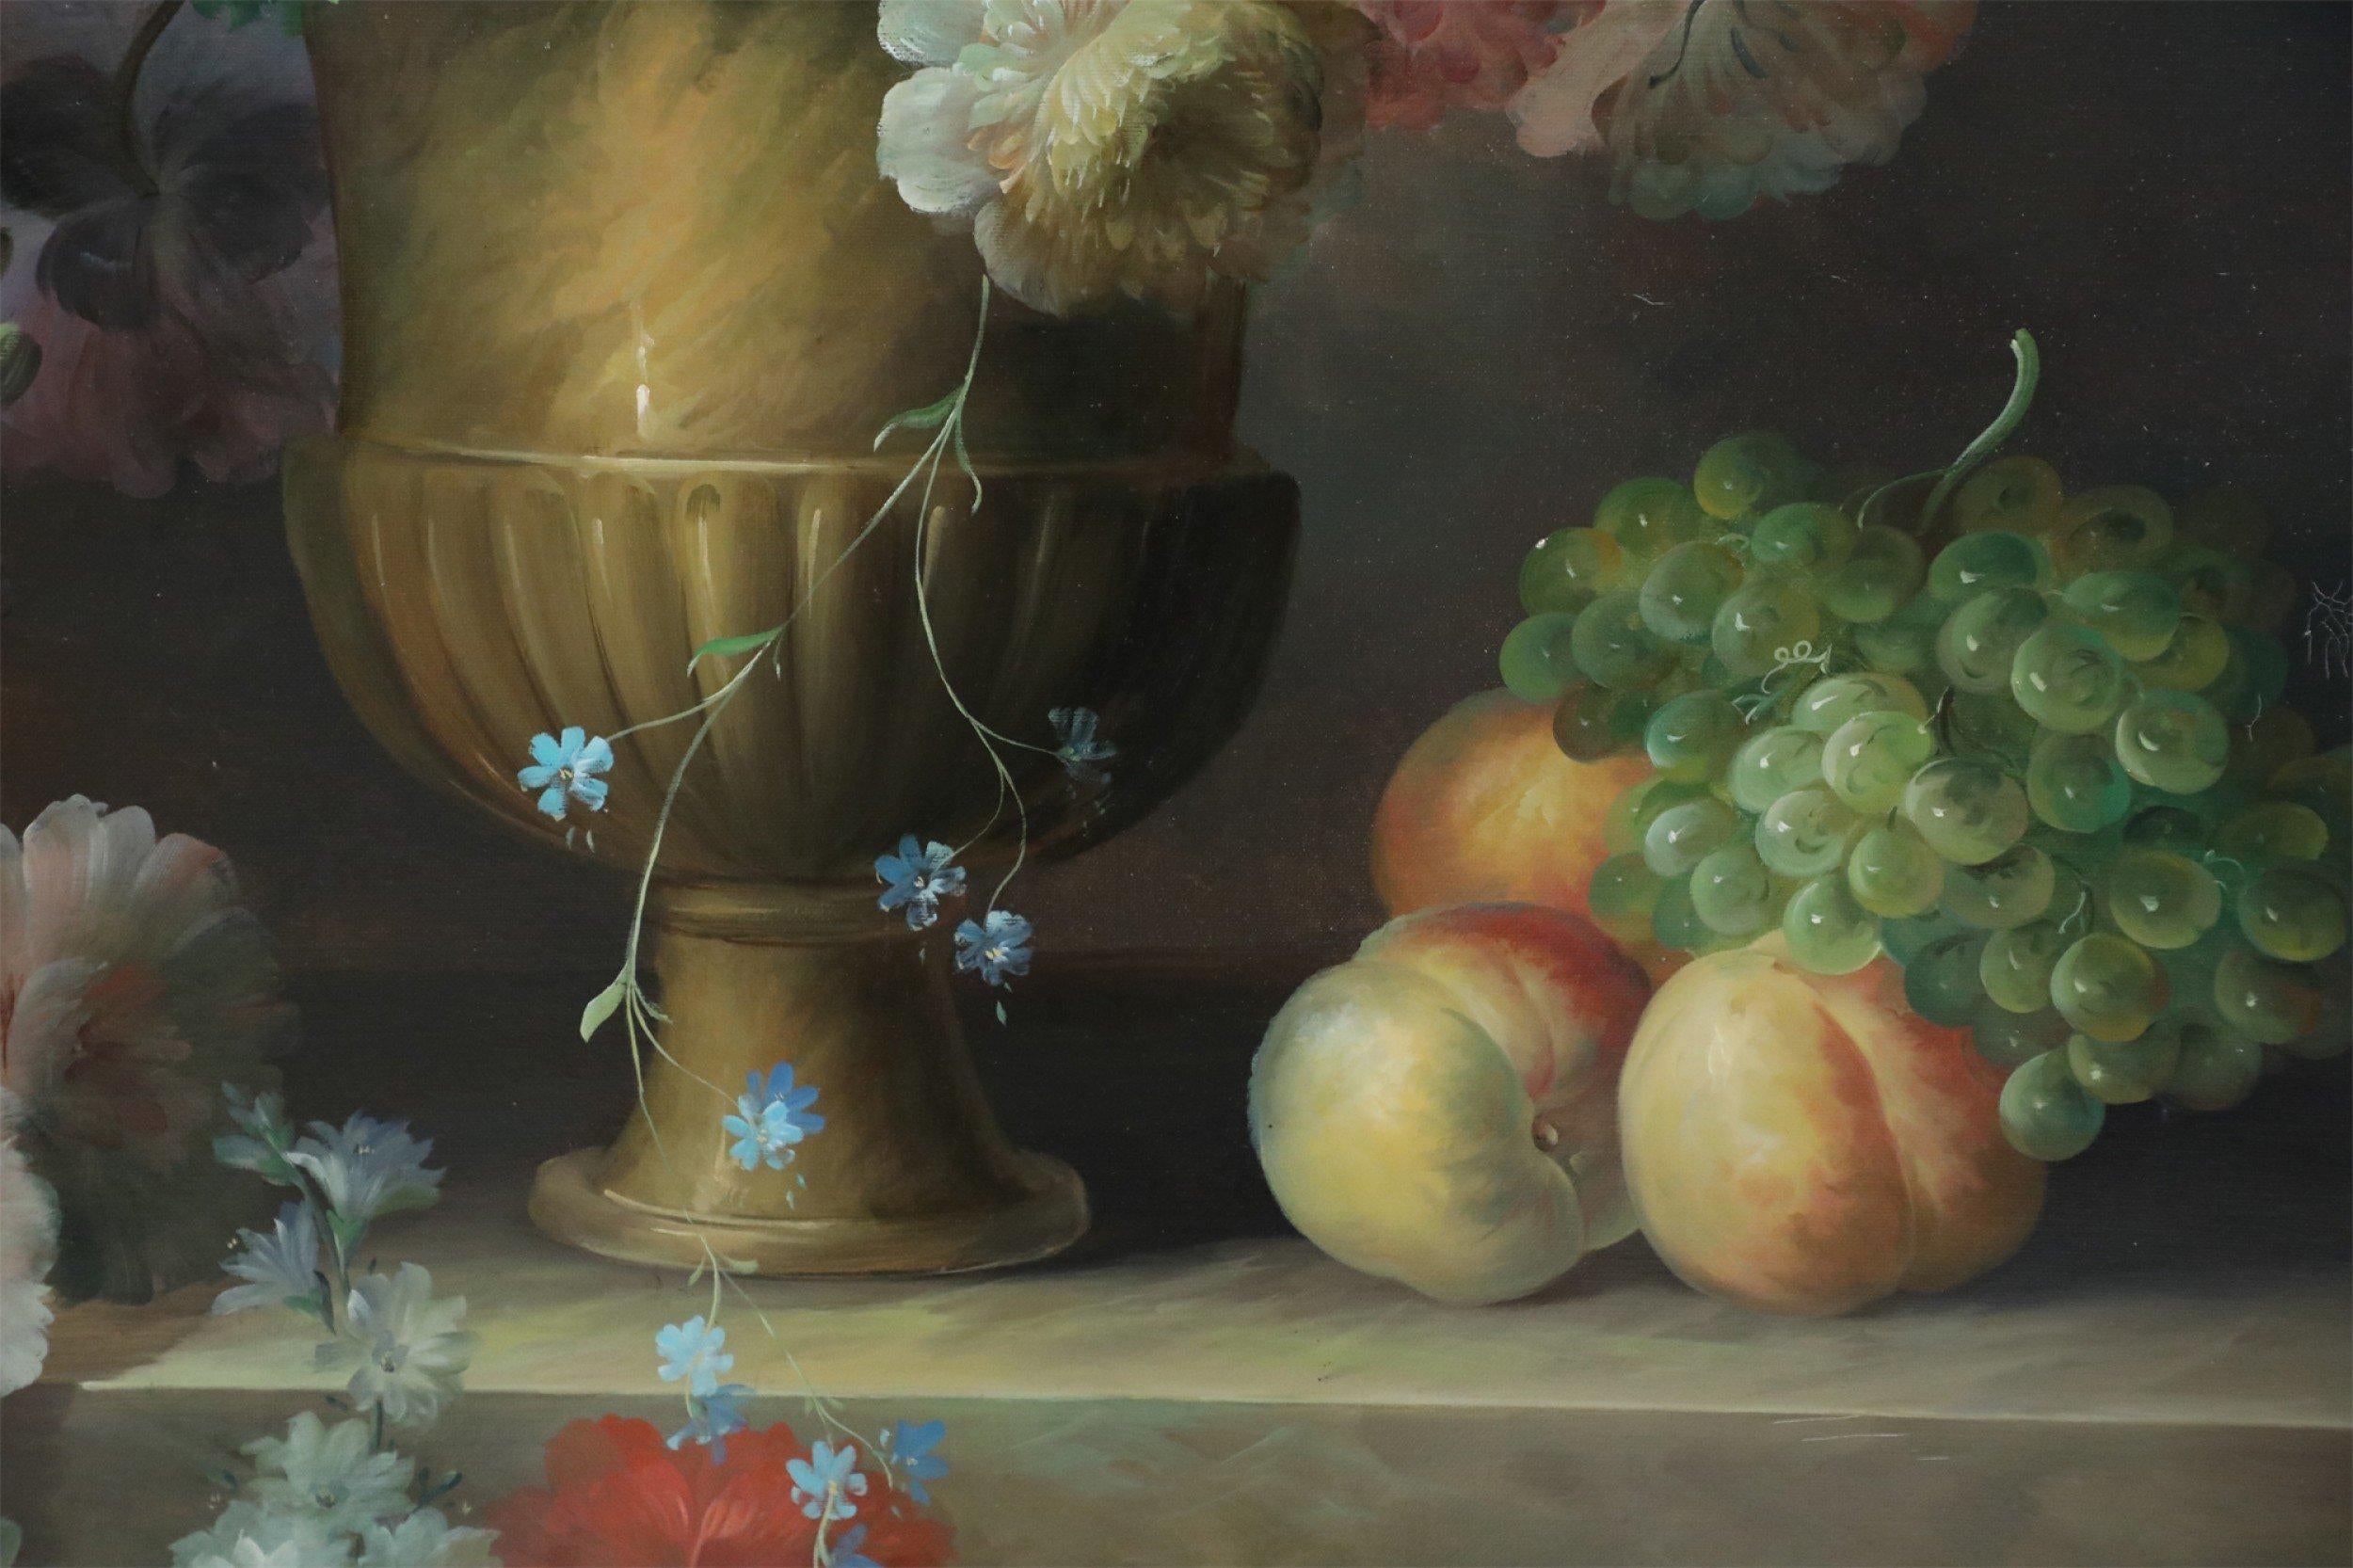 Canvas Large Framed Still Life Oil Painting of an Urn of Flowers and Fruit on a Garden For Sale